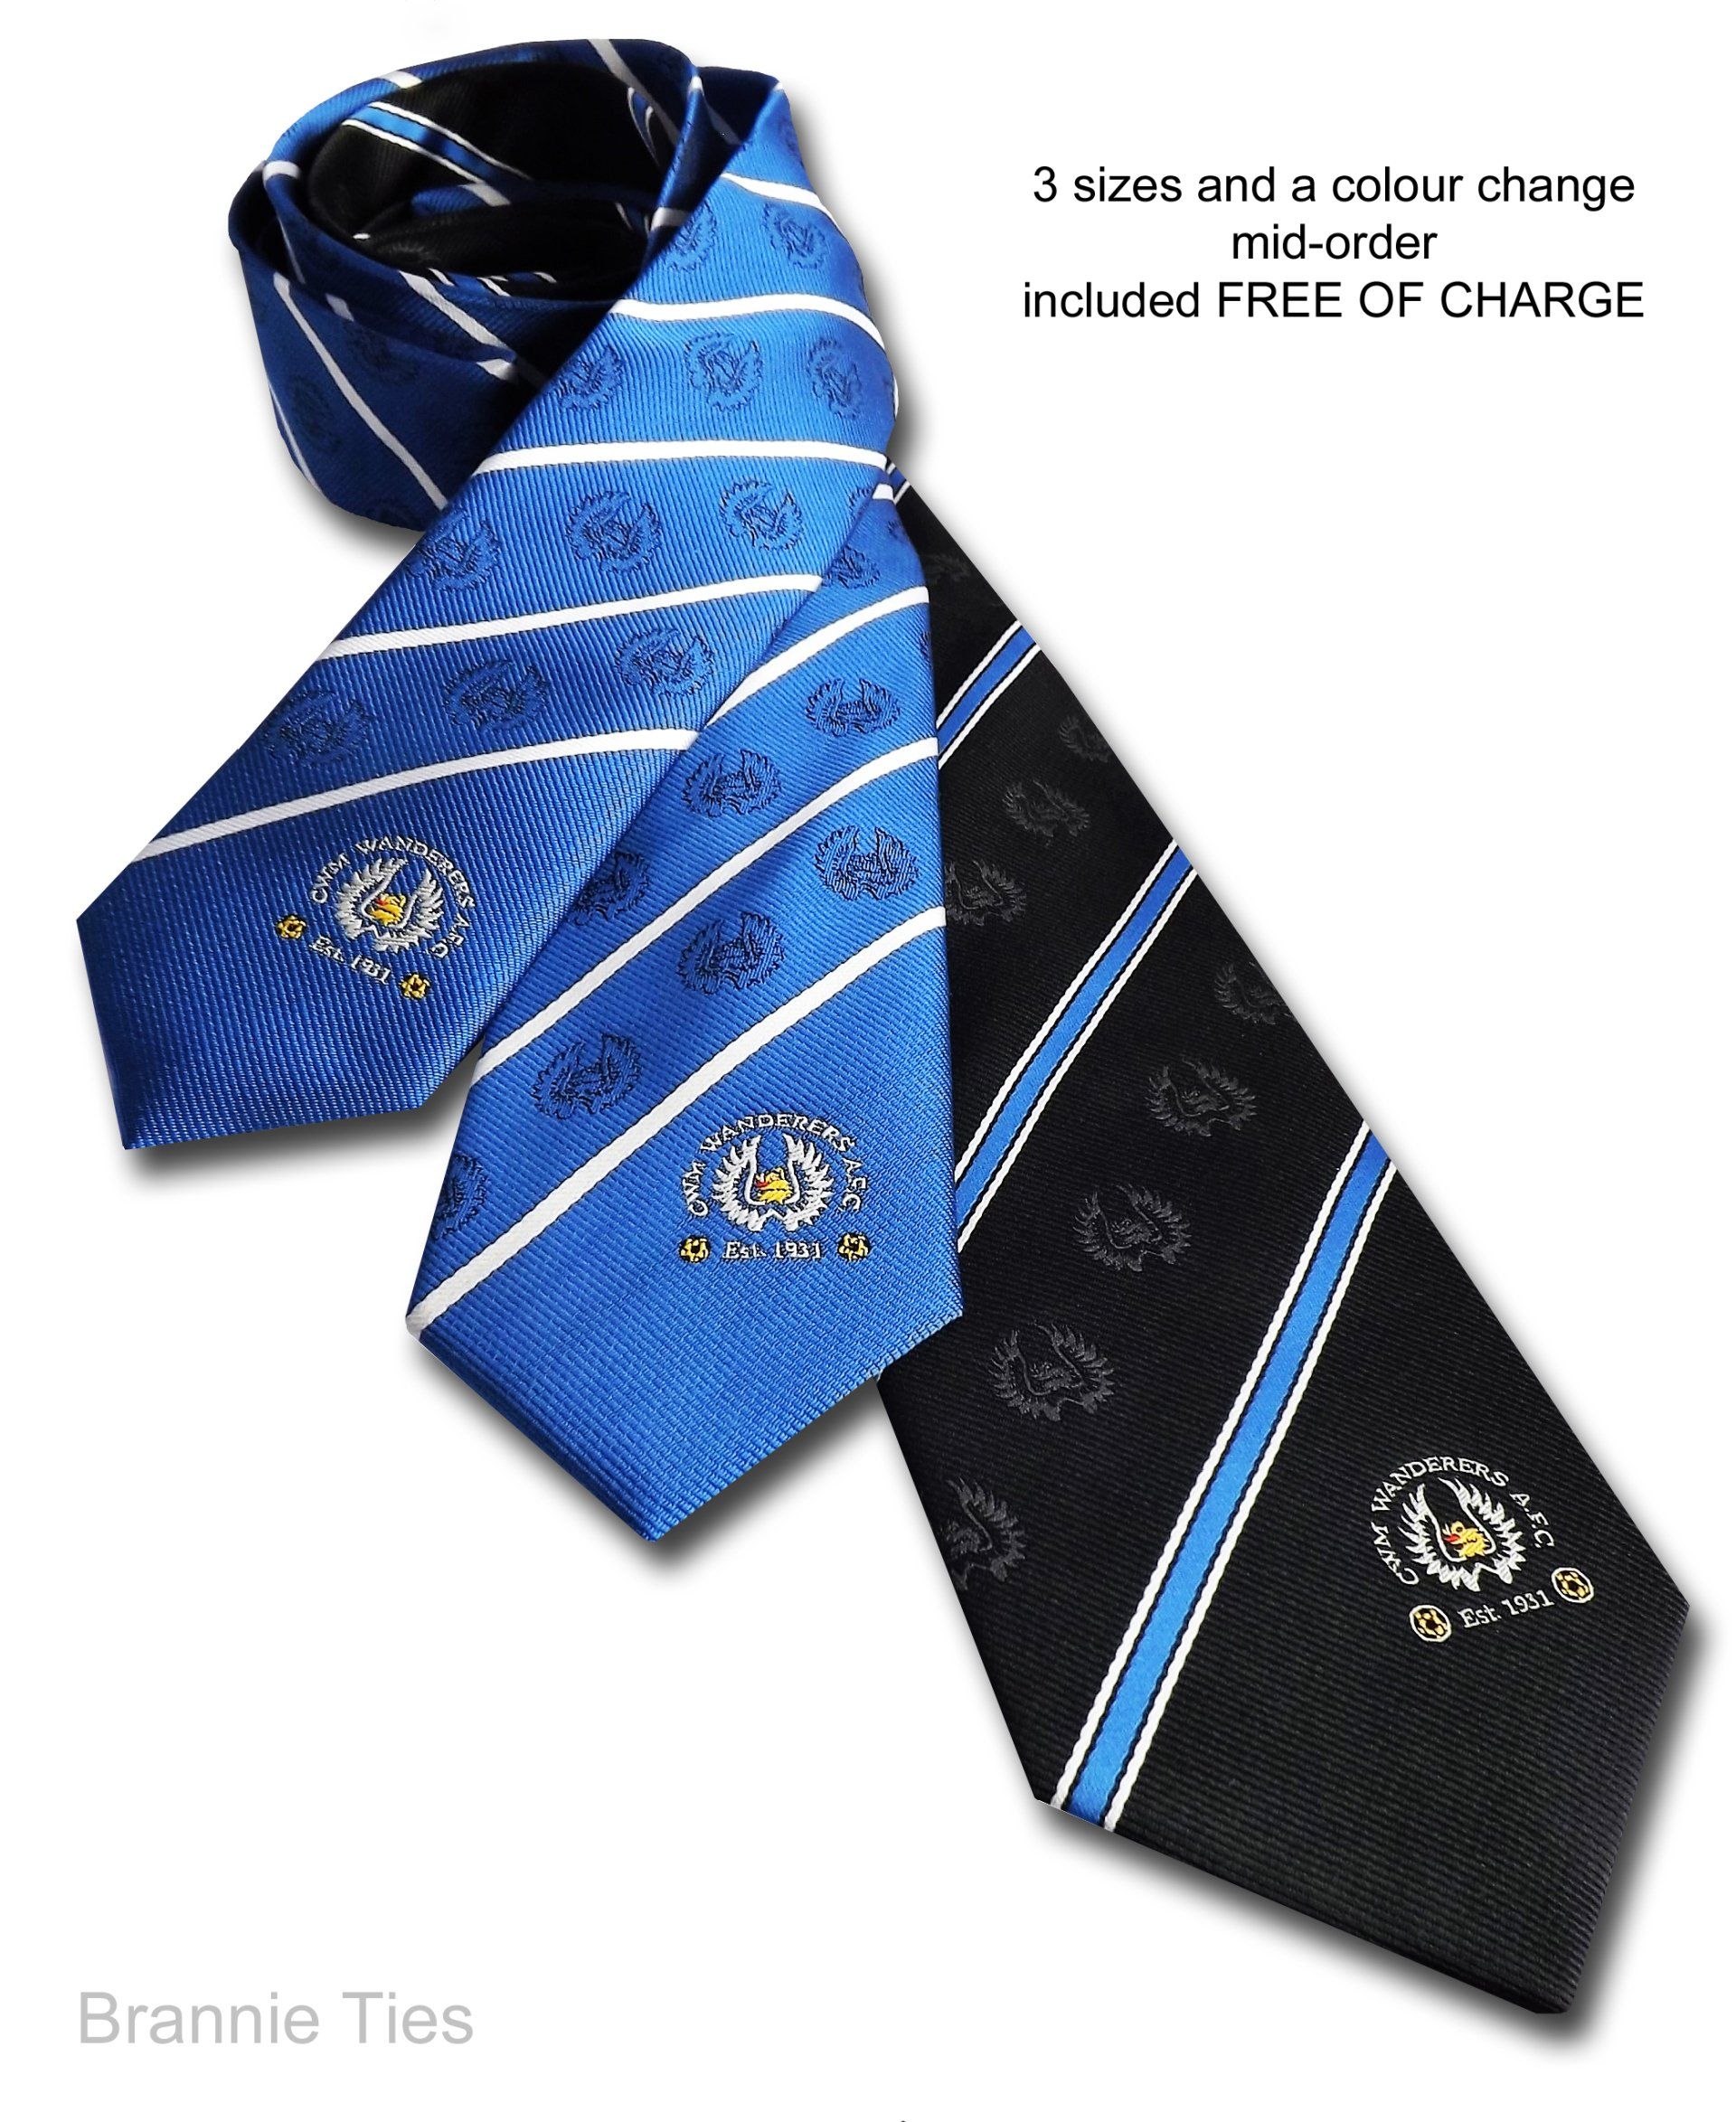 Ties for football clubs